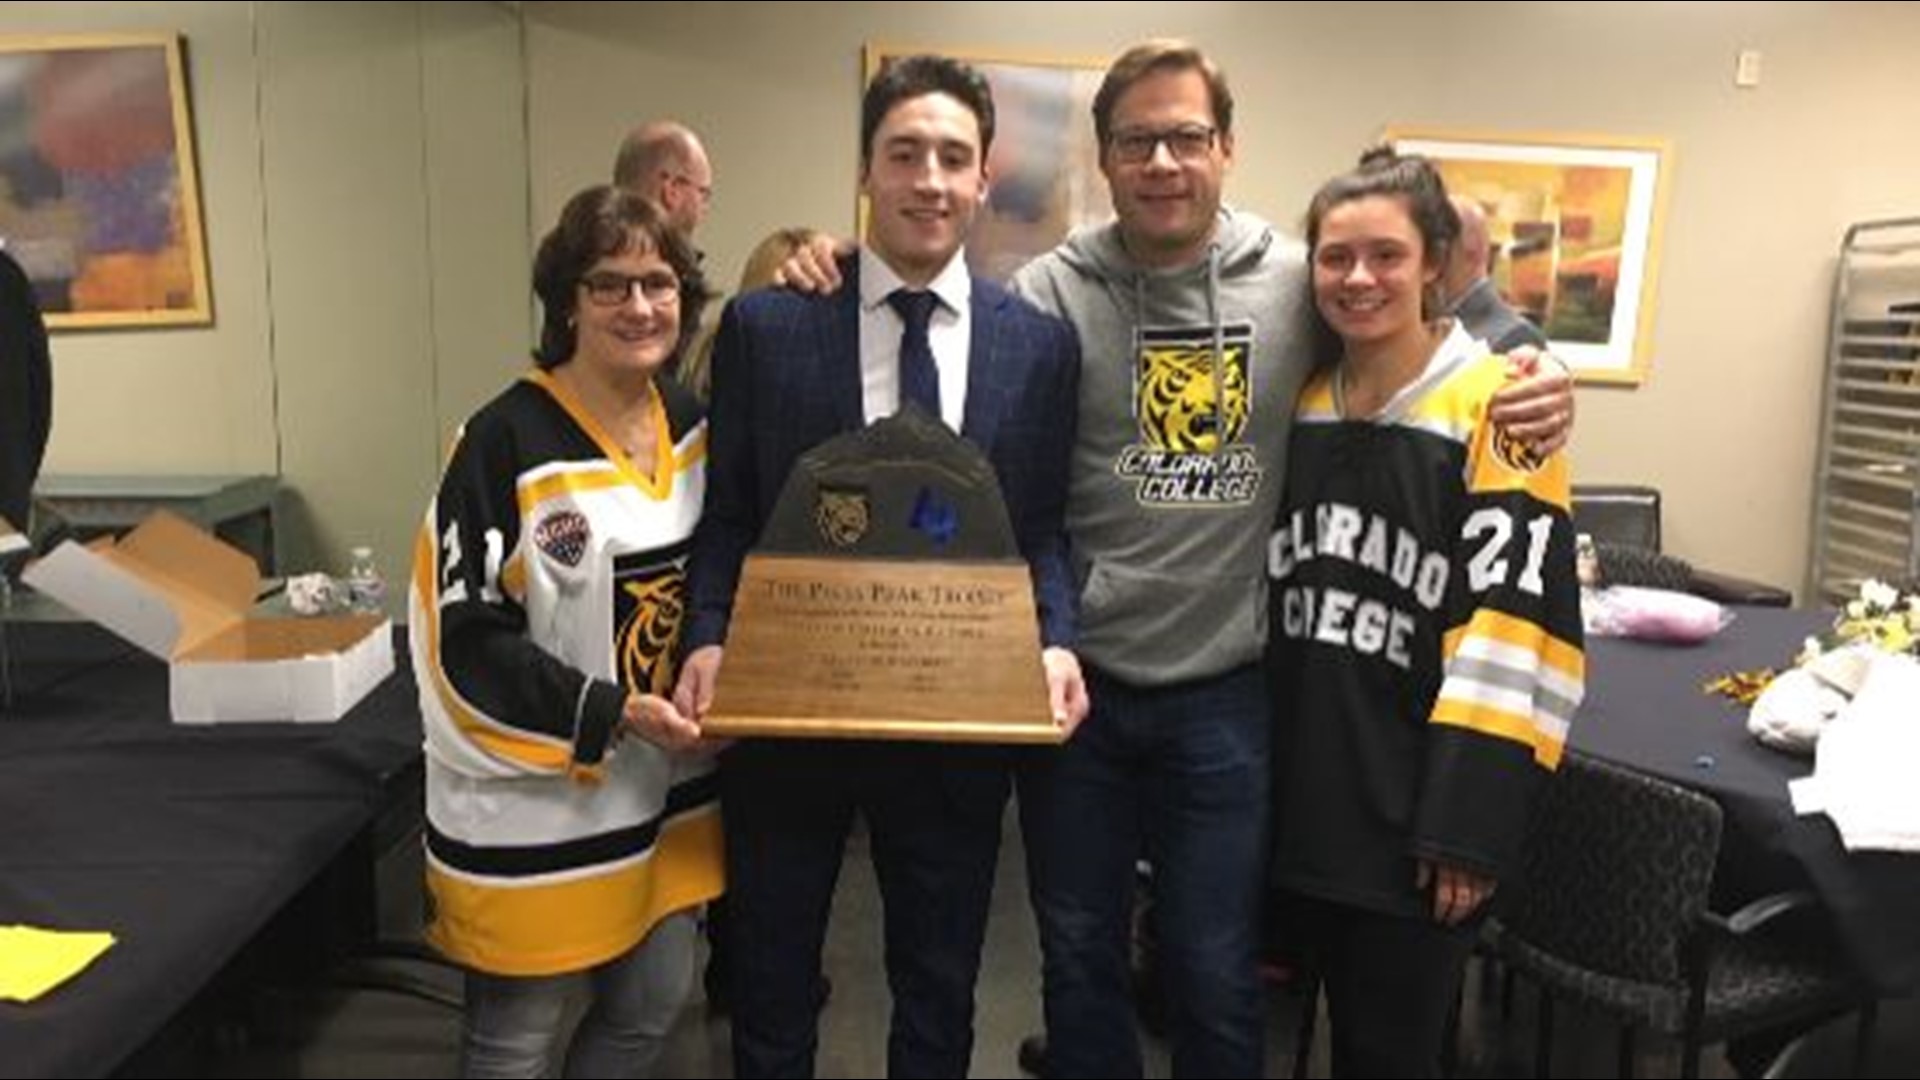 Grant Cruikshank is skating his own path away from his four-time Olympic speed skating parents Bonnie Blair and Dave Cruikshank, as a captain on the CC hockey team.